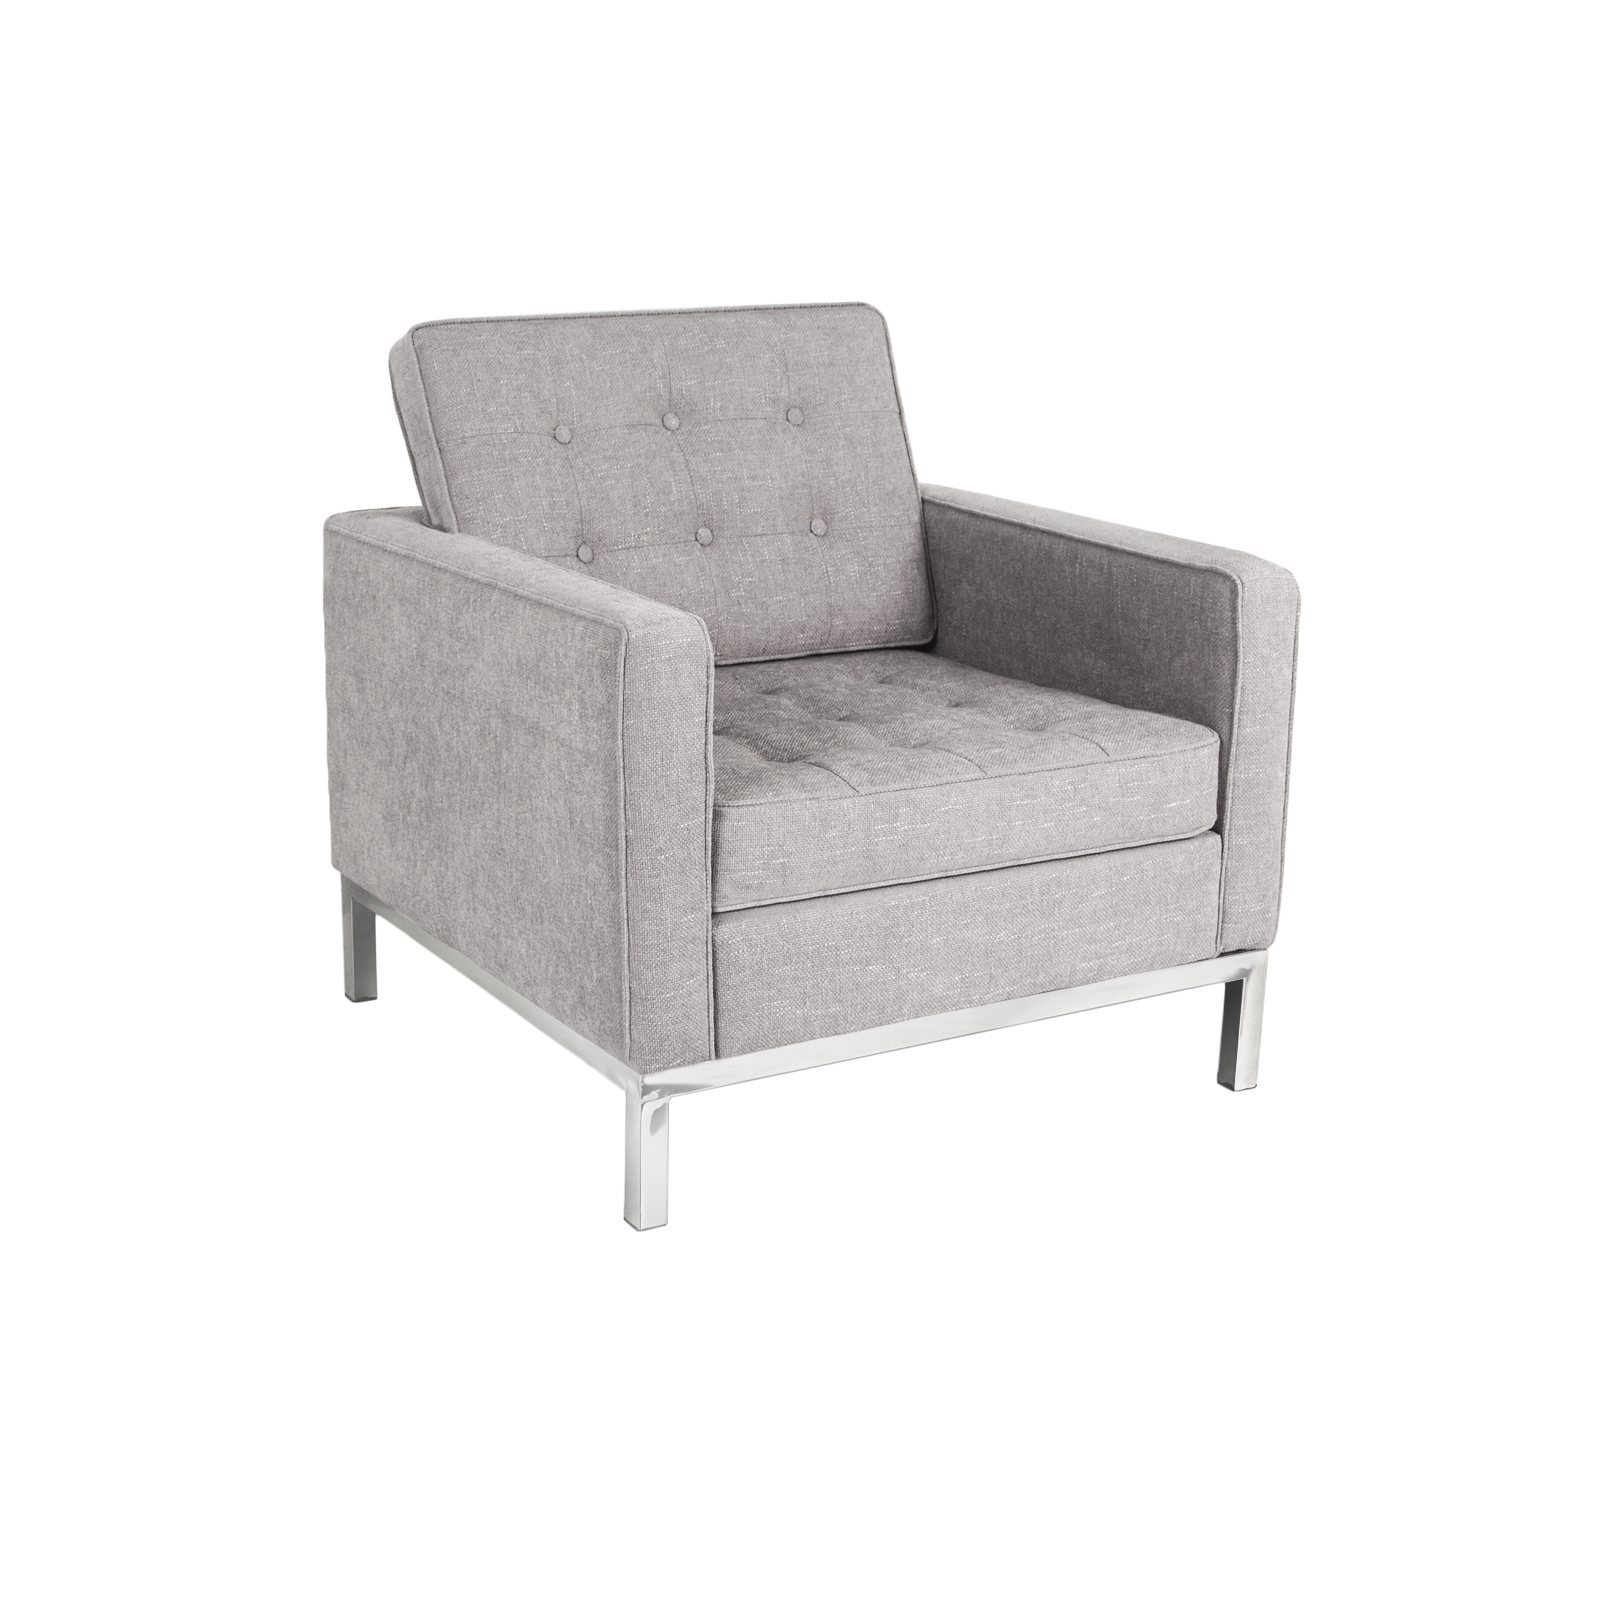 Florence Knoll Lounge Chair Rentals | Event Furniture Rental | Delivery ...